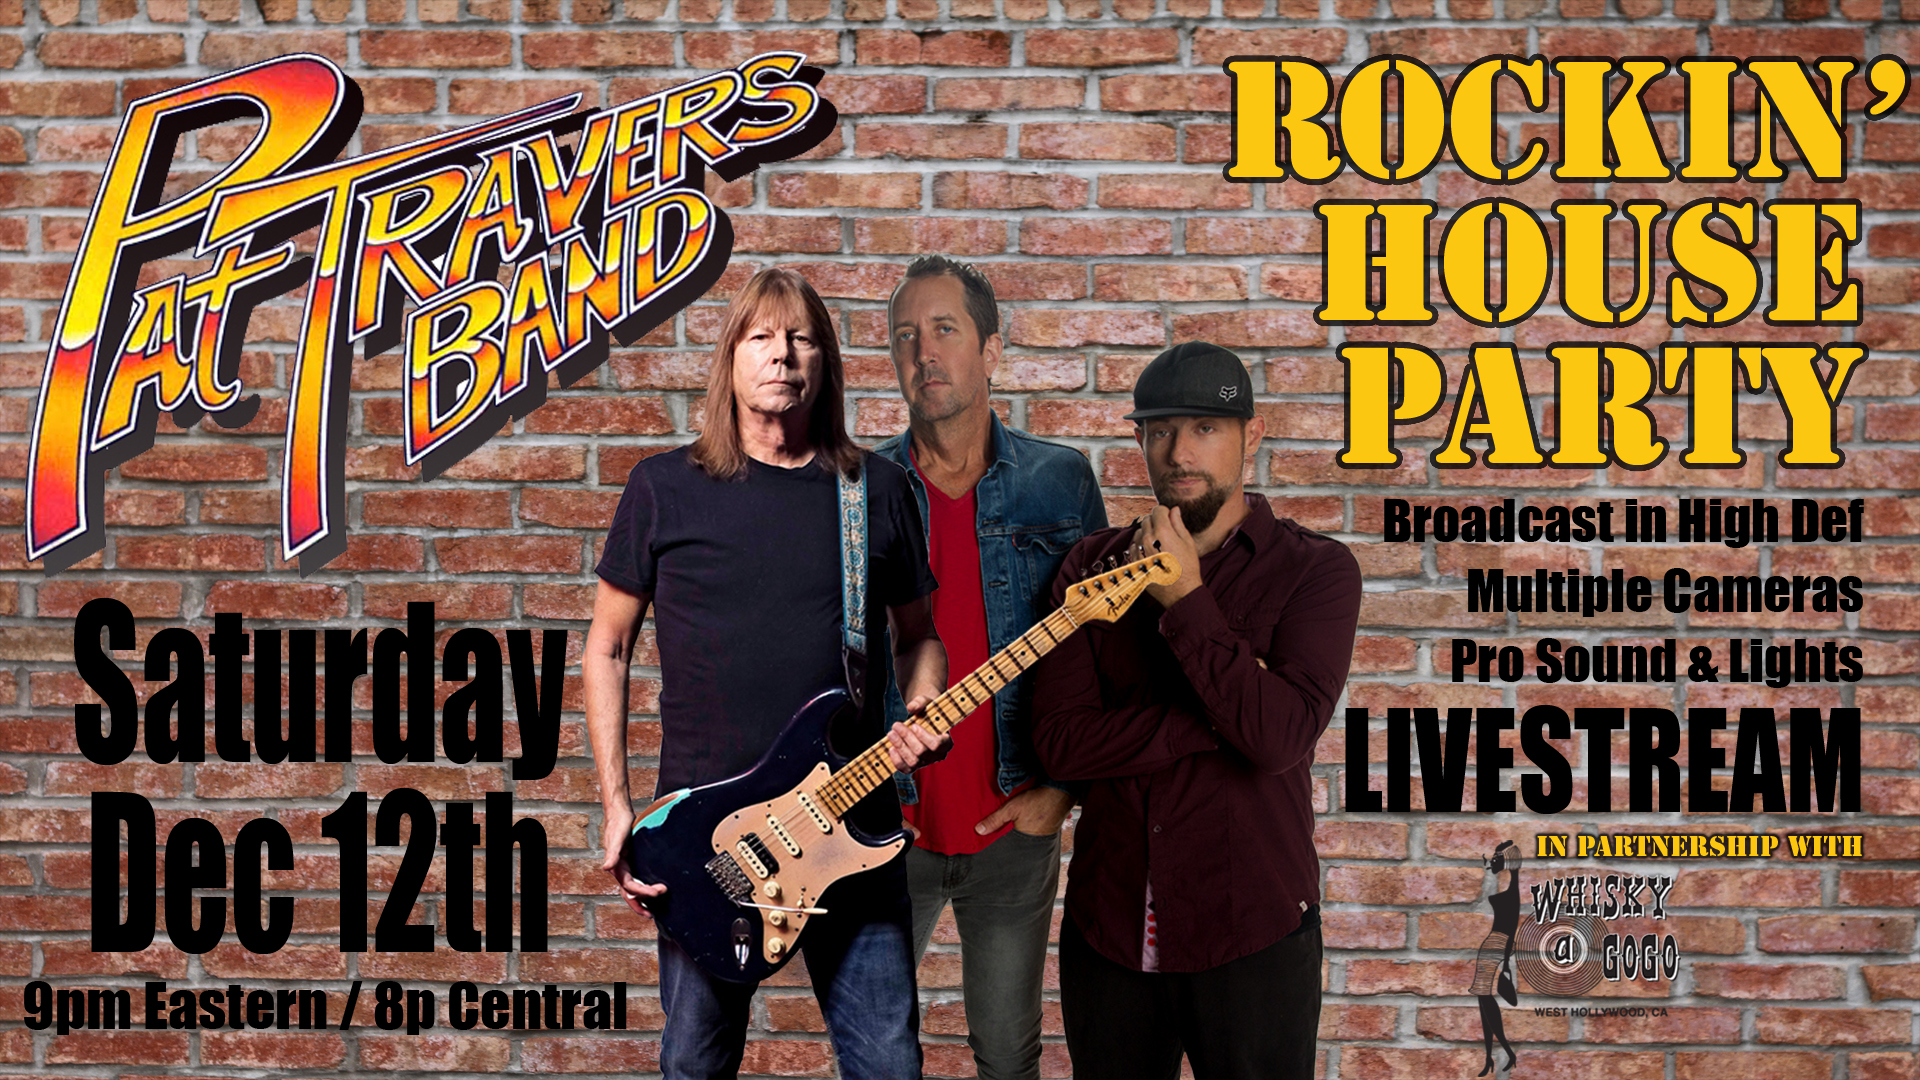 Pat travers rockin house party live stream